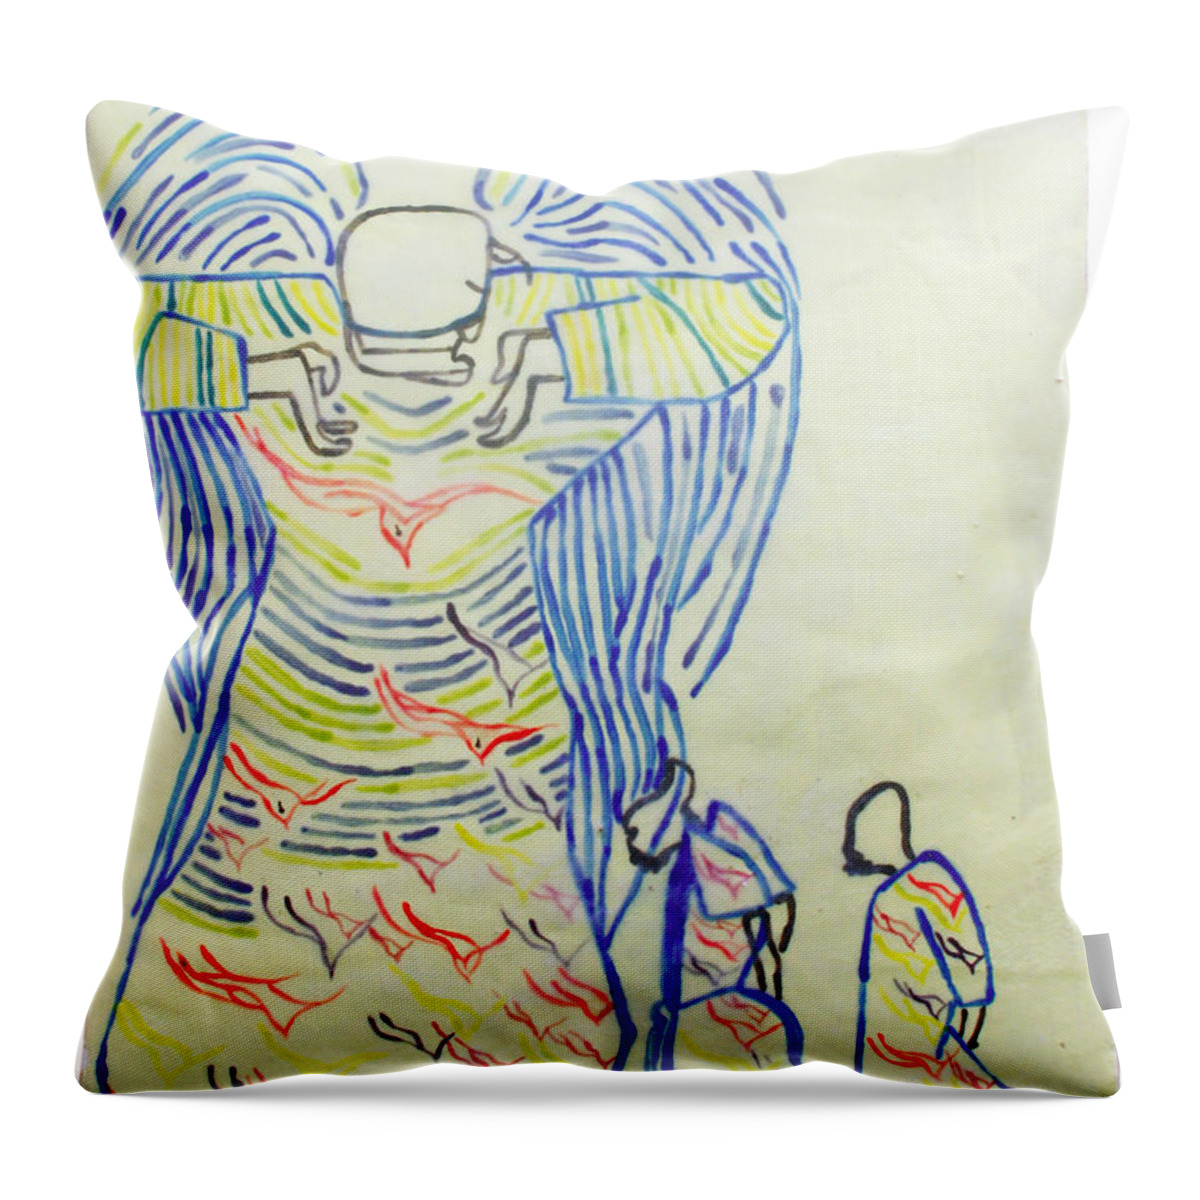 Jesus Throw Pillow featuring the painting Jesus Guardian Angel by Gloria Ssali